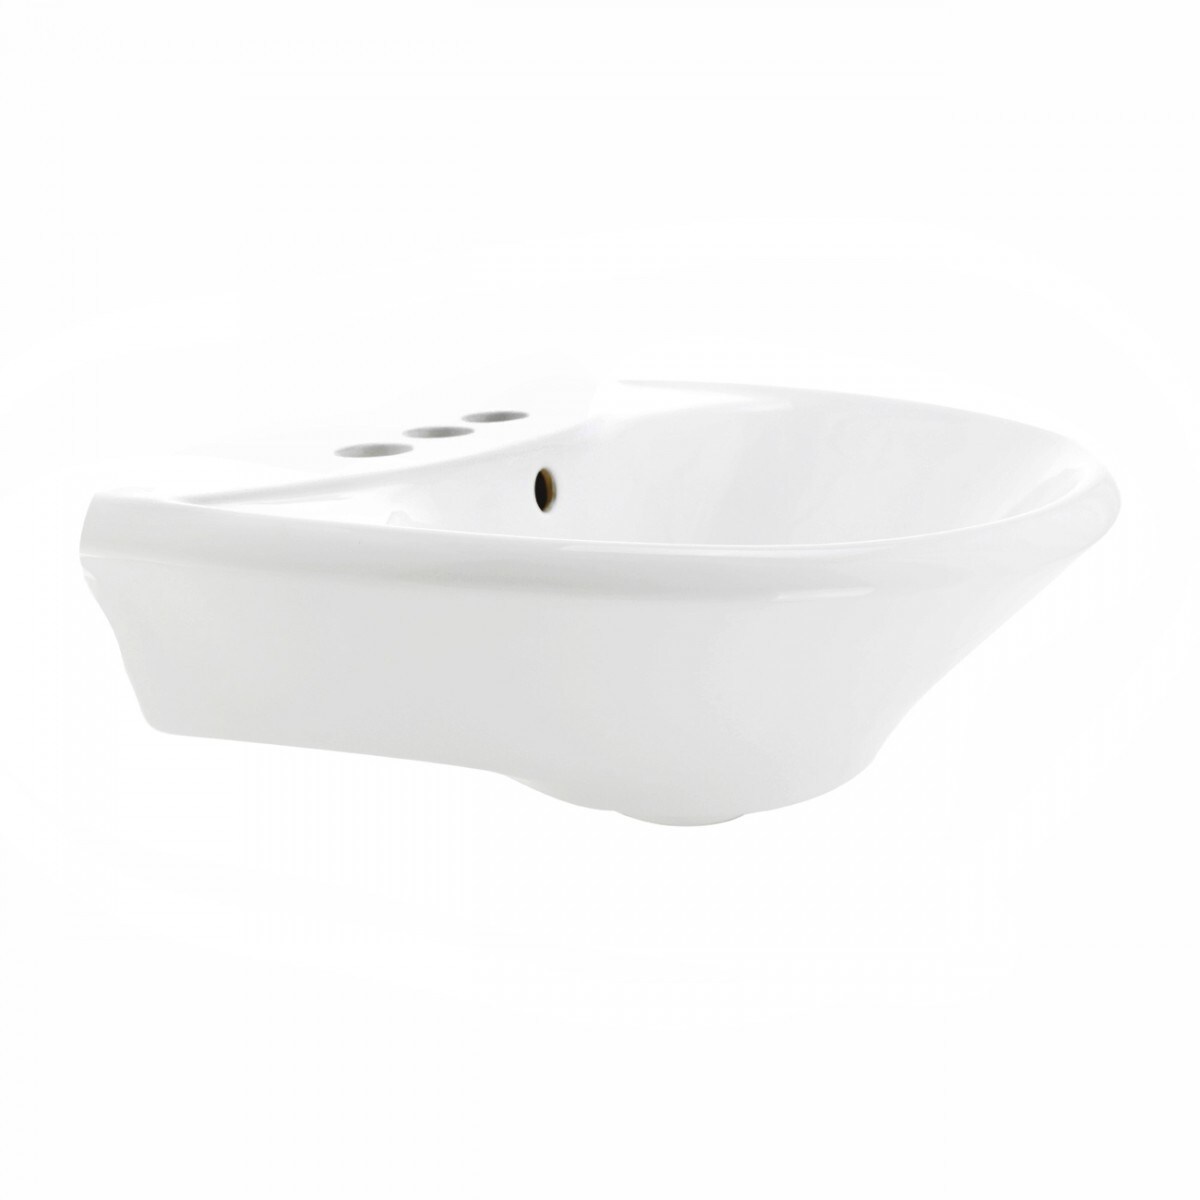 Renovators Supply Ondine Pedestal Sink 16" White Porcelain Sink with Overflow And Pre-Drilled Holes